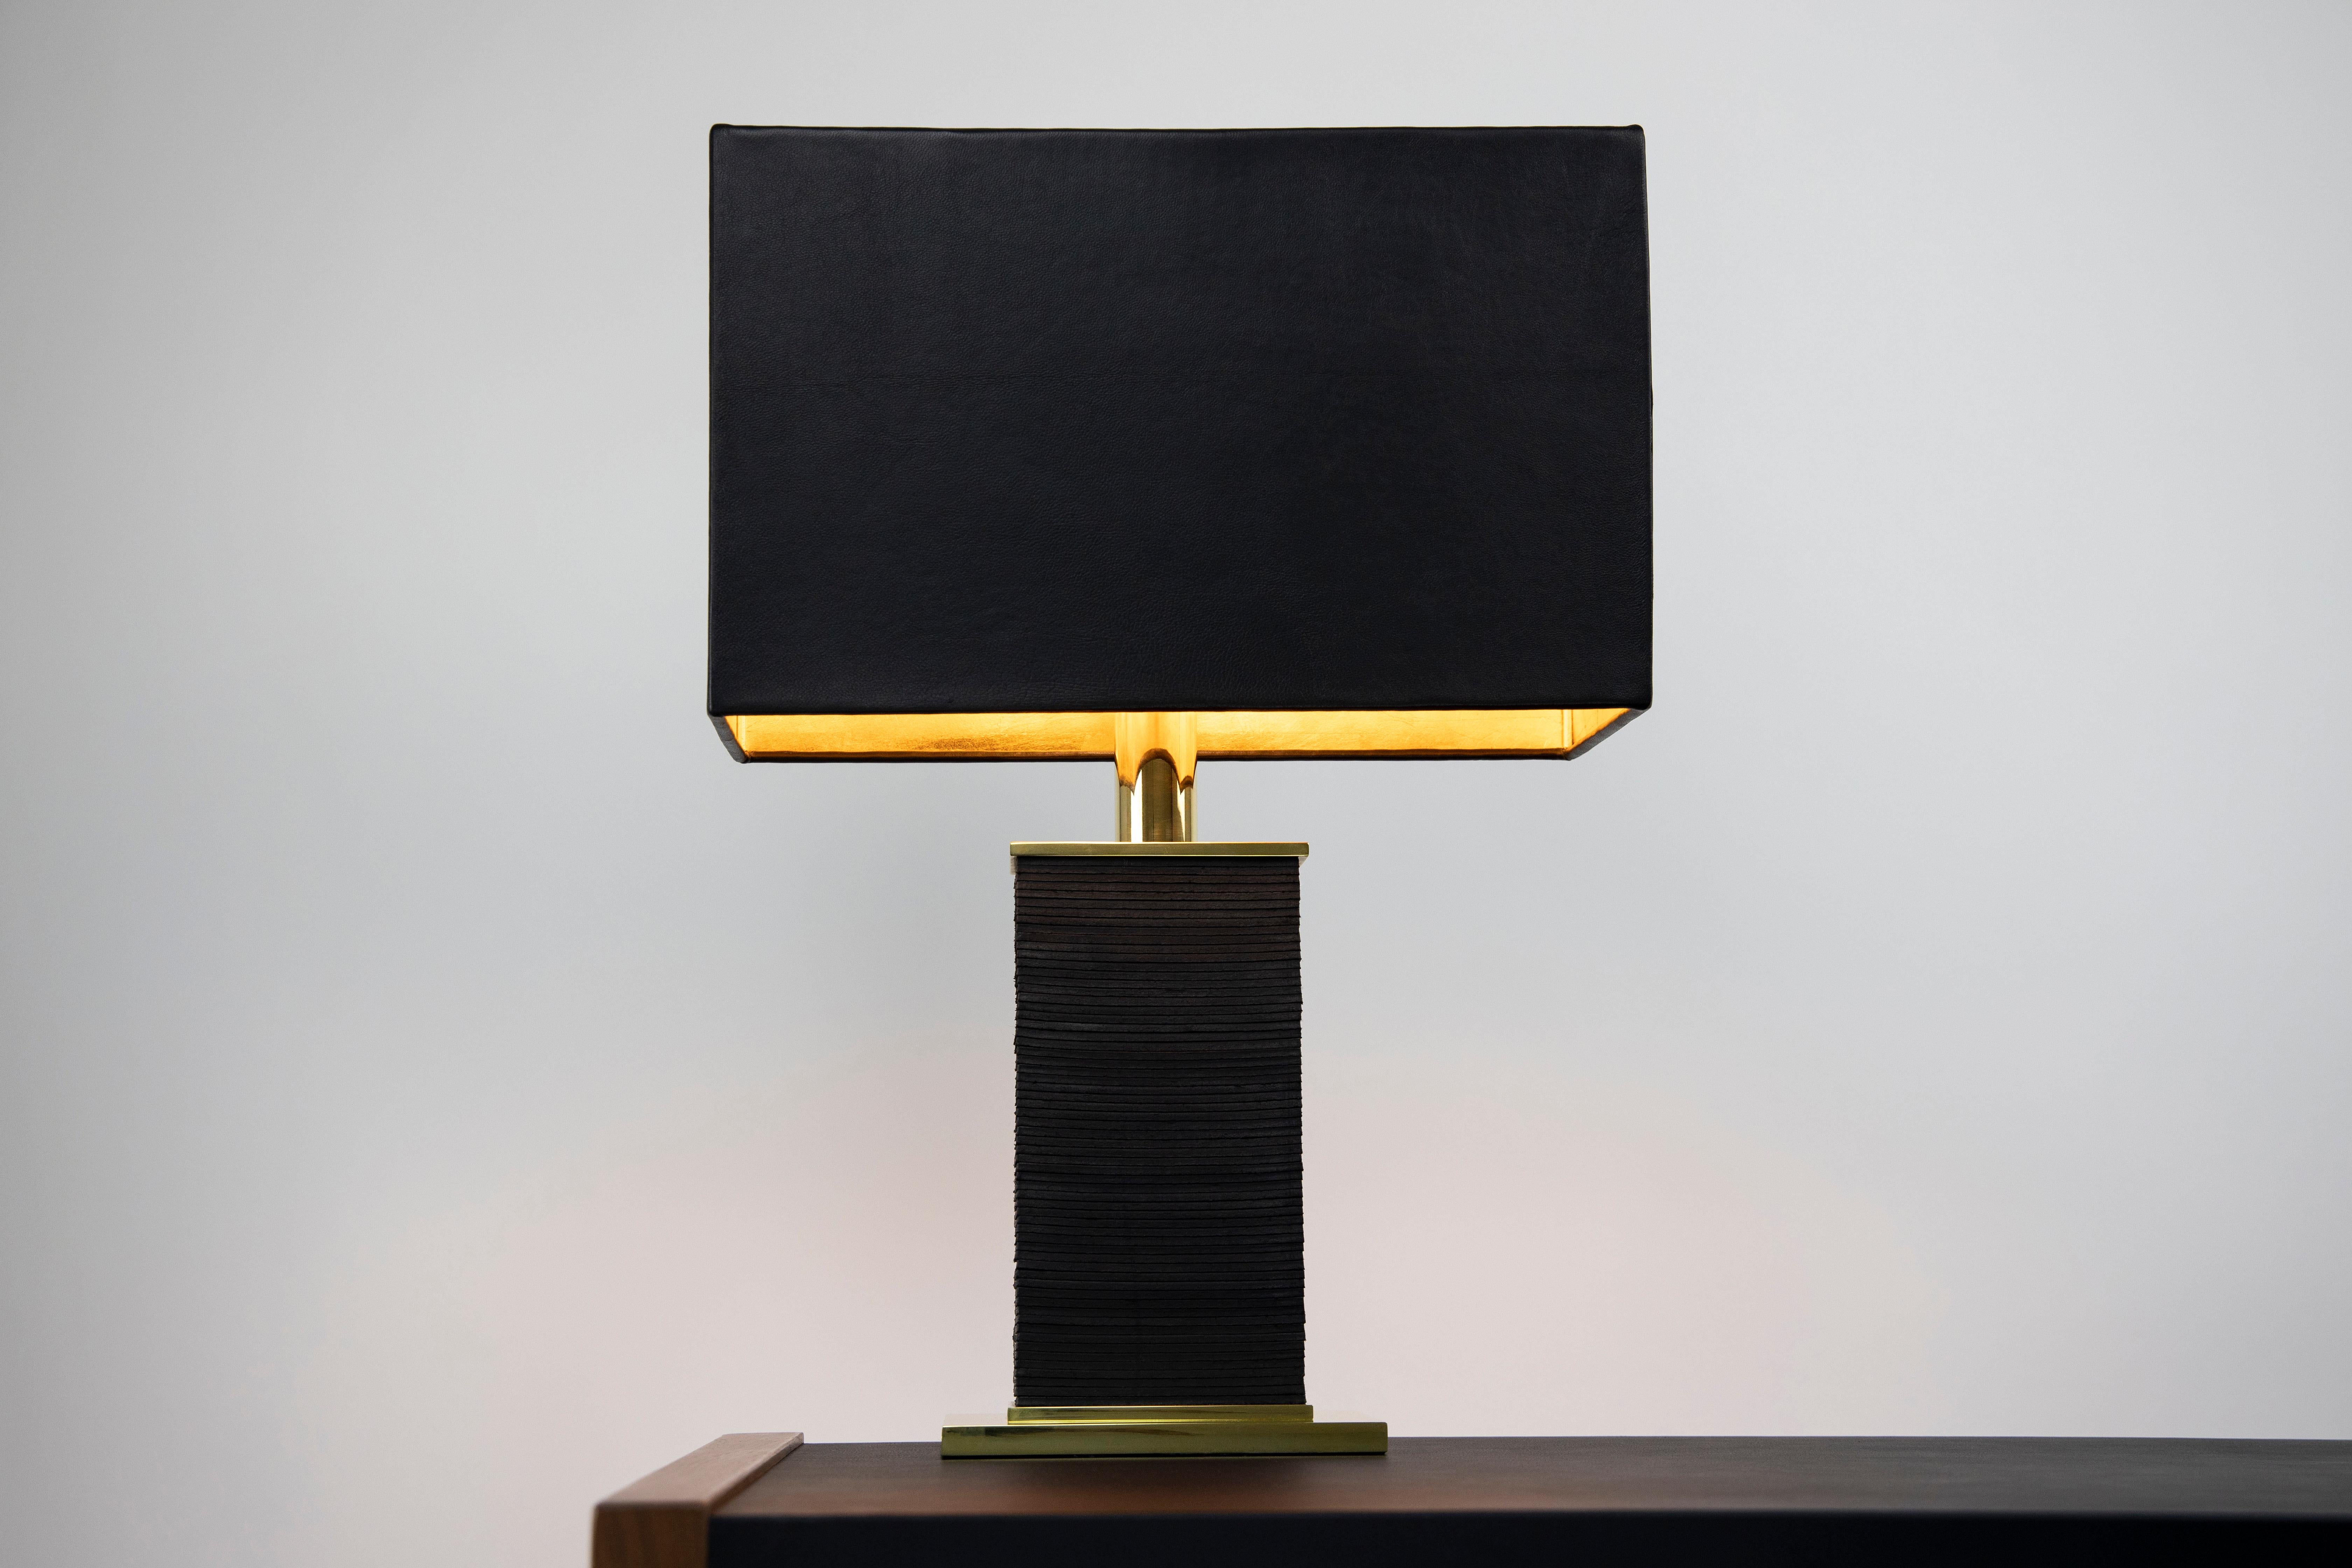 The stacked monolith table lamp is grounded, powerful, and sexy. Its silhouette is modern and simple, yet detailed and tactile up close. The body is made of stacked polished and waxed solid brass plates and saddle leather. Please note that the brass